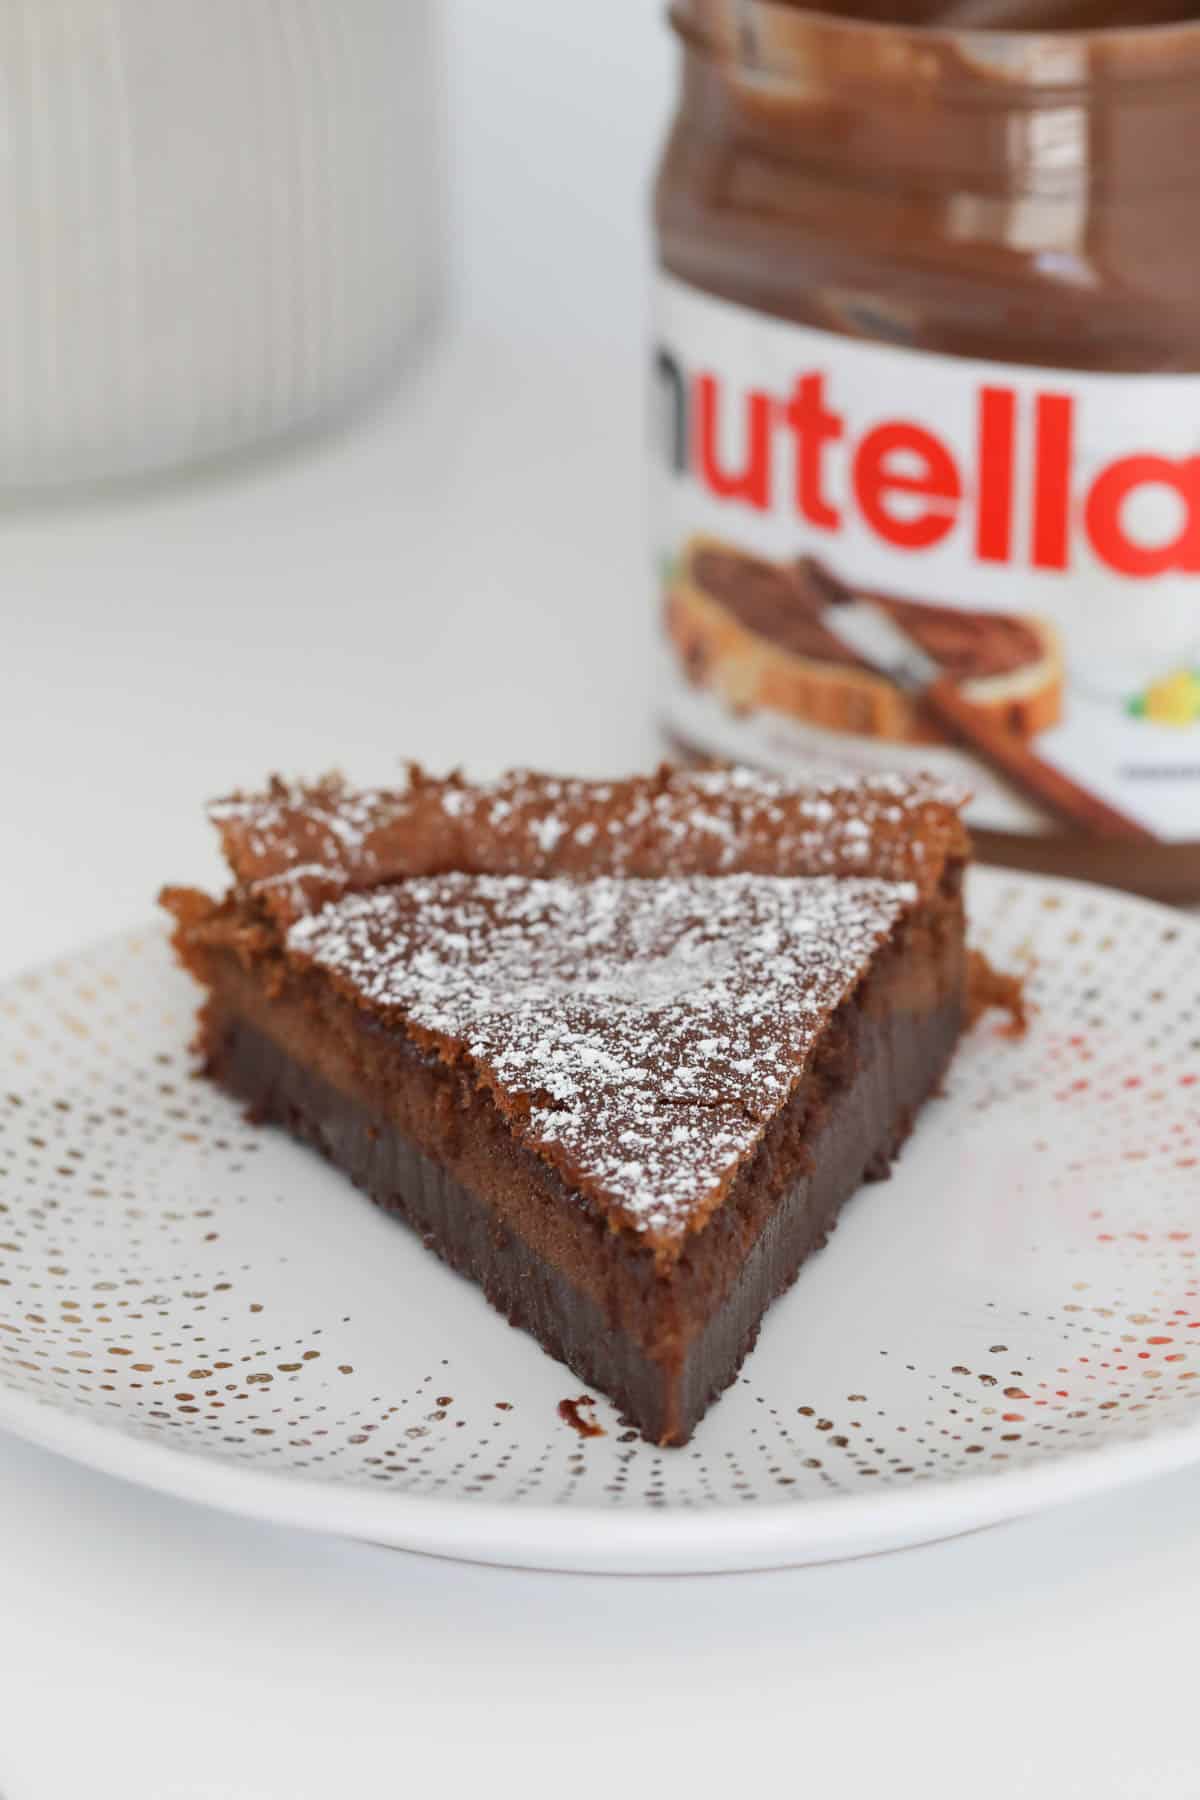 A slice of baked fudgy cake on a plate with a jar of Nutella in the background.